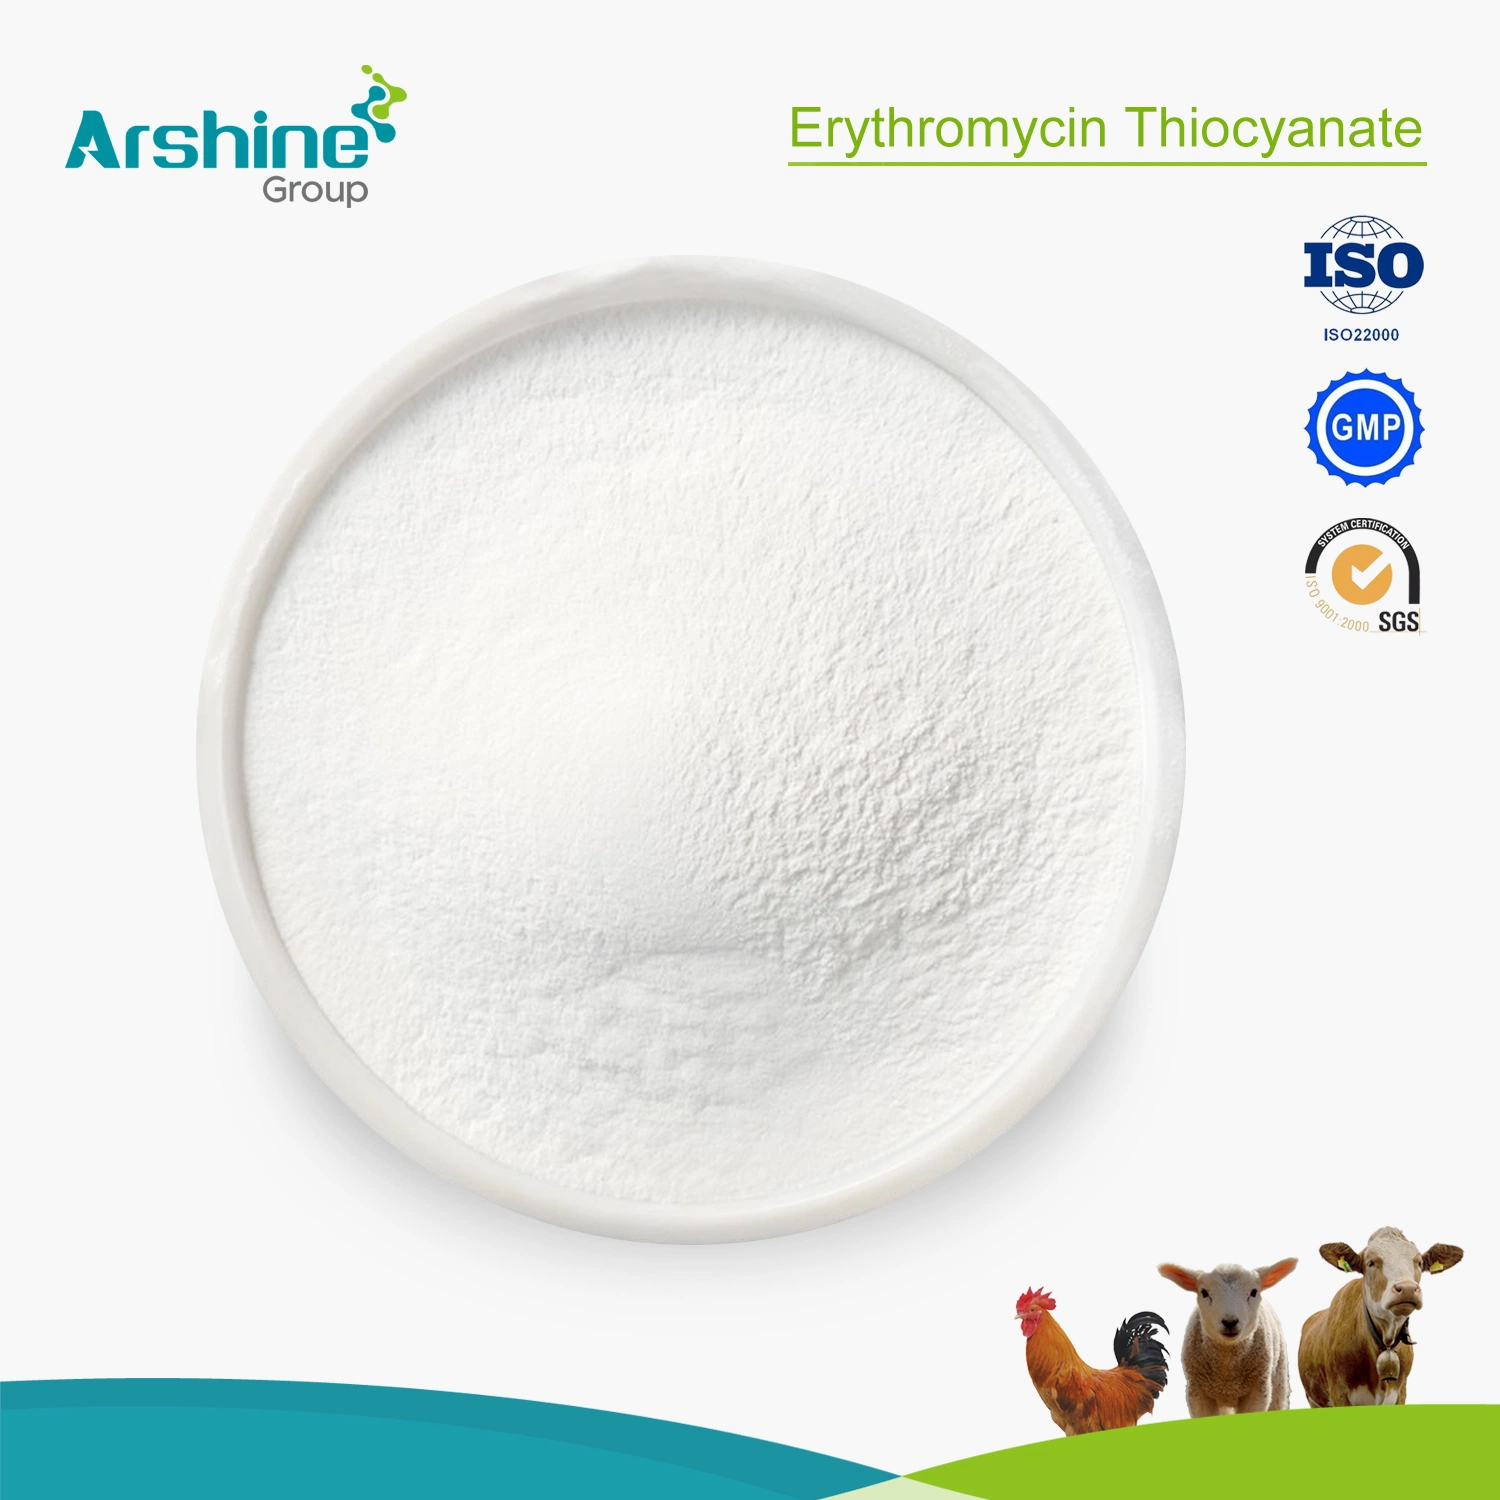 Veterinary Medicine Product Erythromycin Thiocyanate with GMP Certification